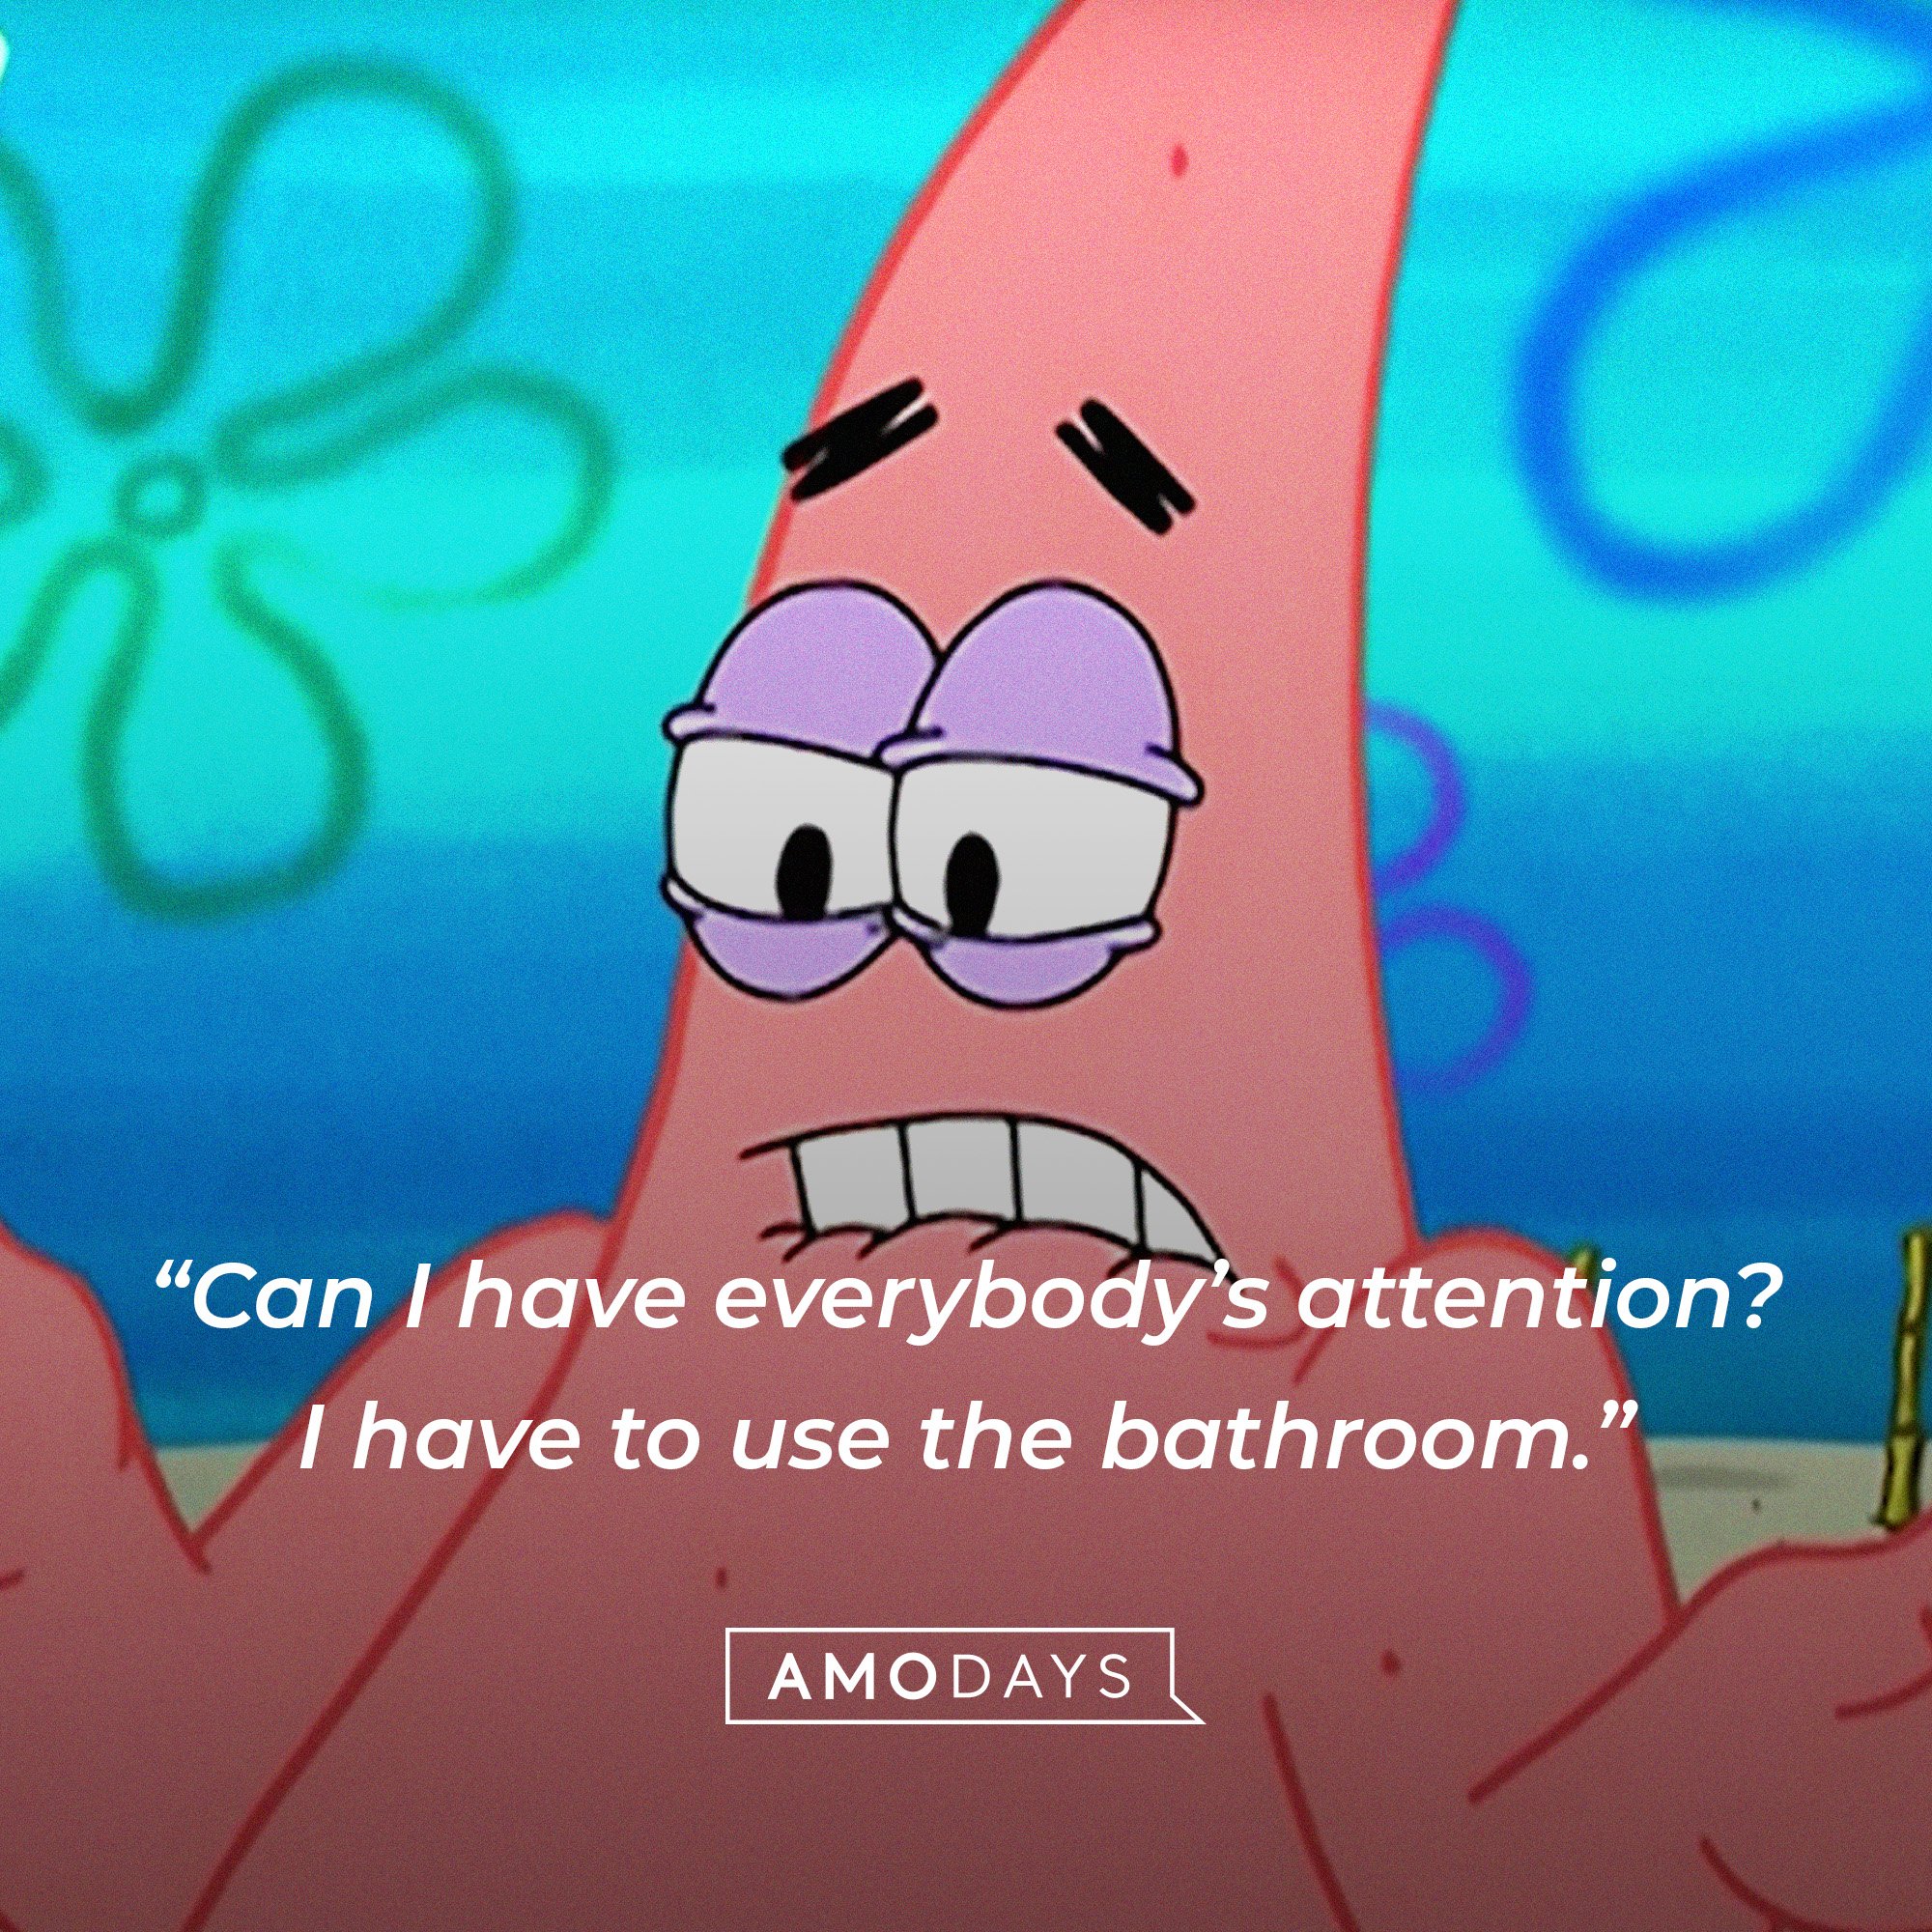 Patrick Star’s quote: “Can I have everybody’s attention? I have to use the bathroom.”  | Image: AmoDays